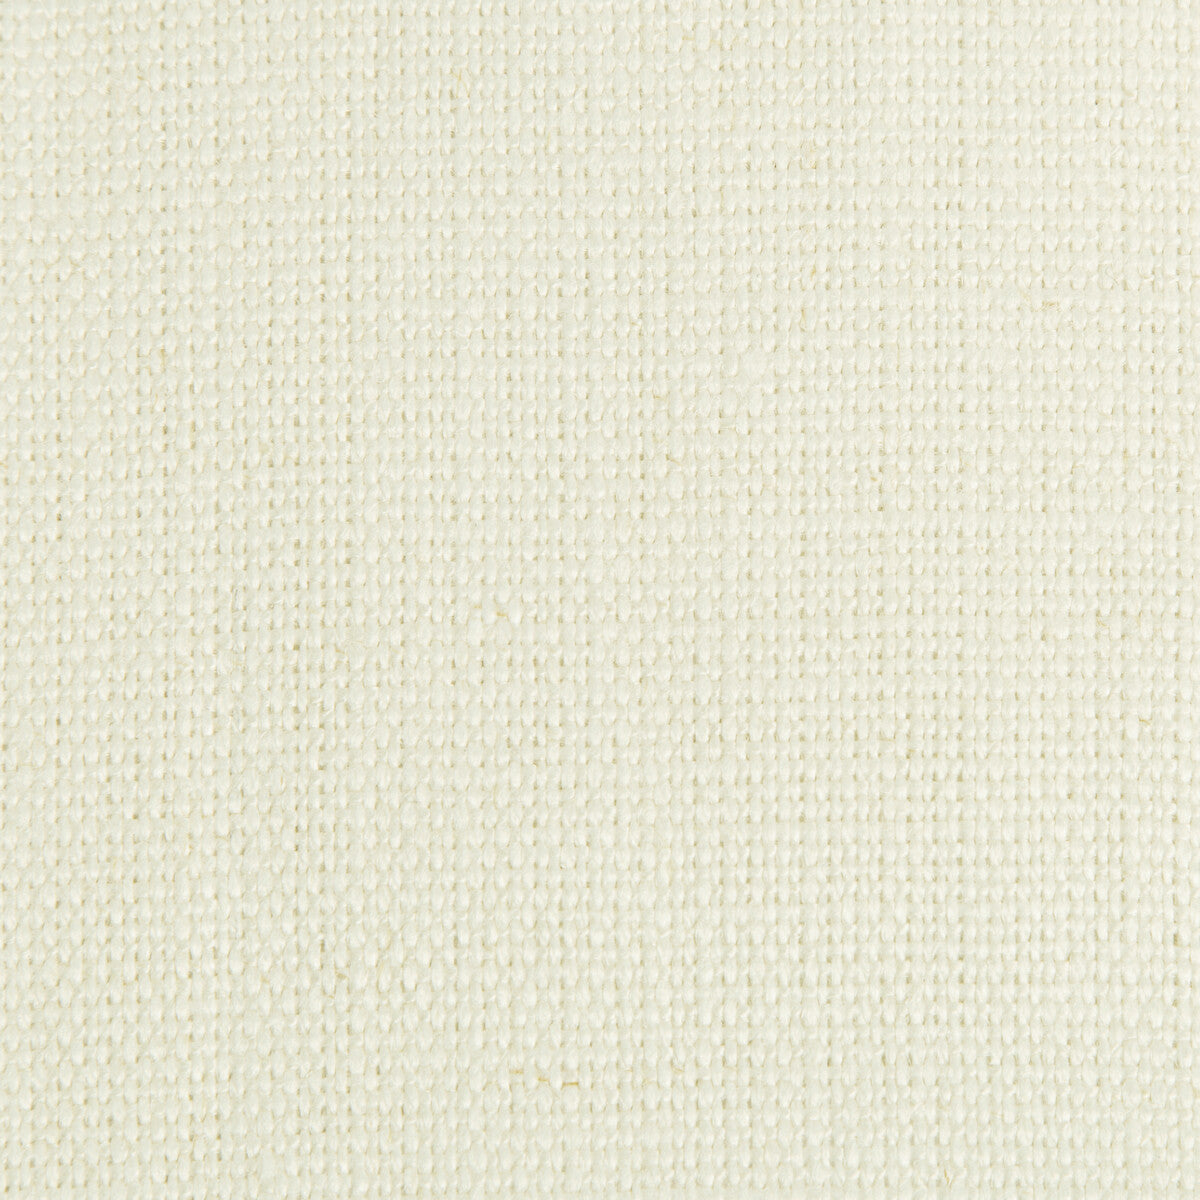 Stone Harbor fabric in snow color - pattern 27591.111.0 - by Kravet Basics in the The Complete Linen IV collection